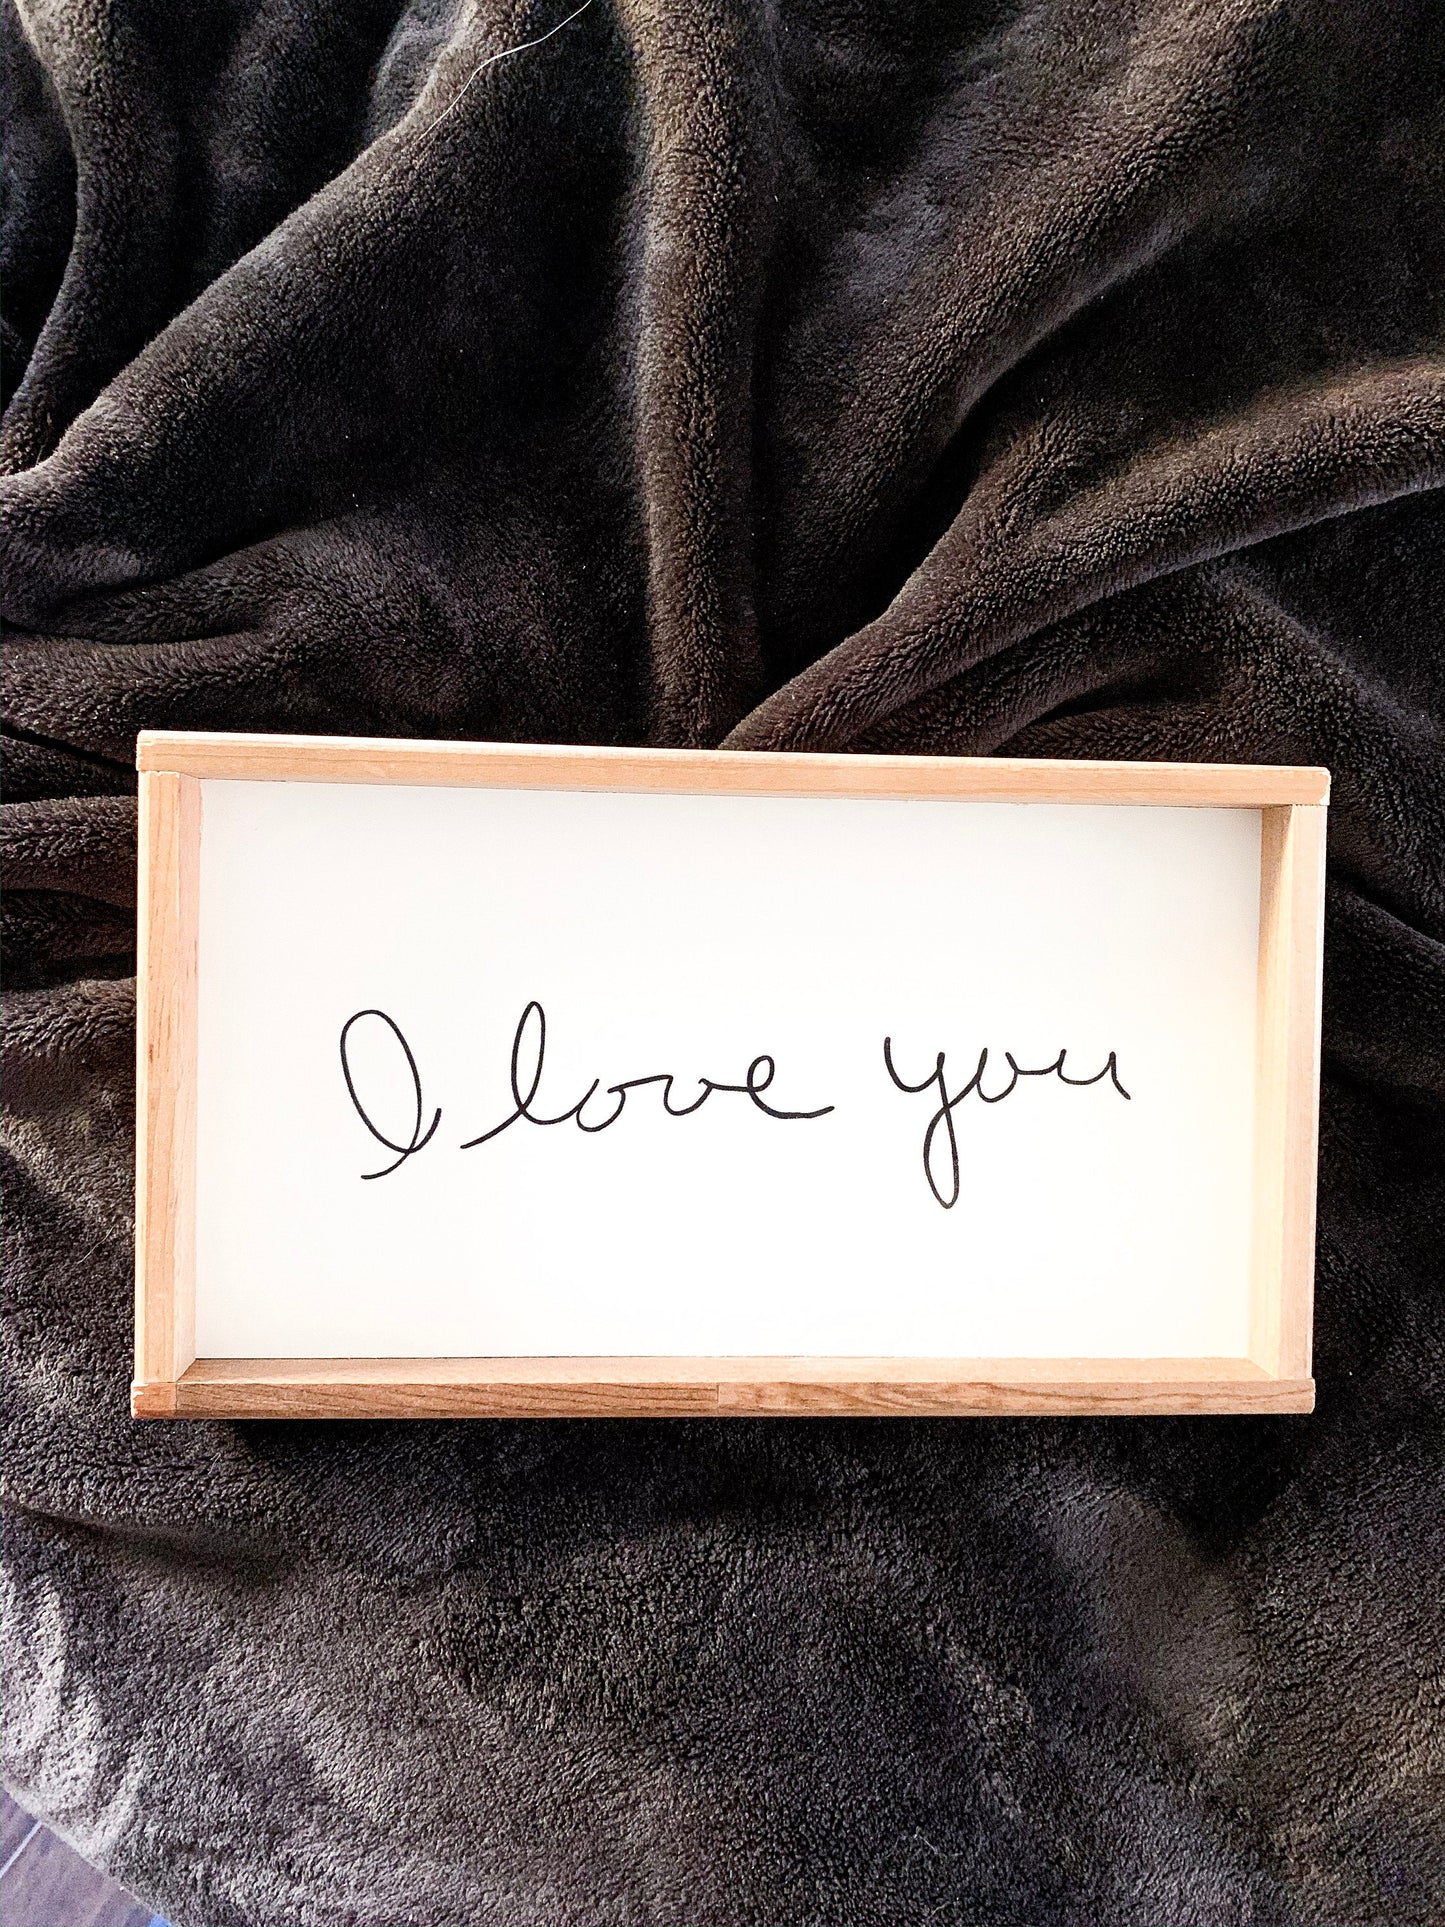 Your Family handwritten Note transferred to wood